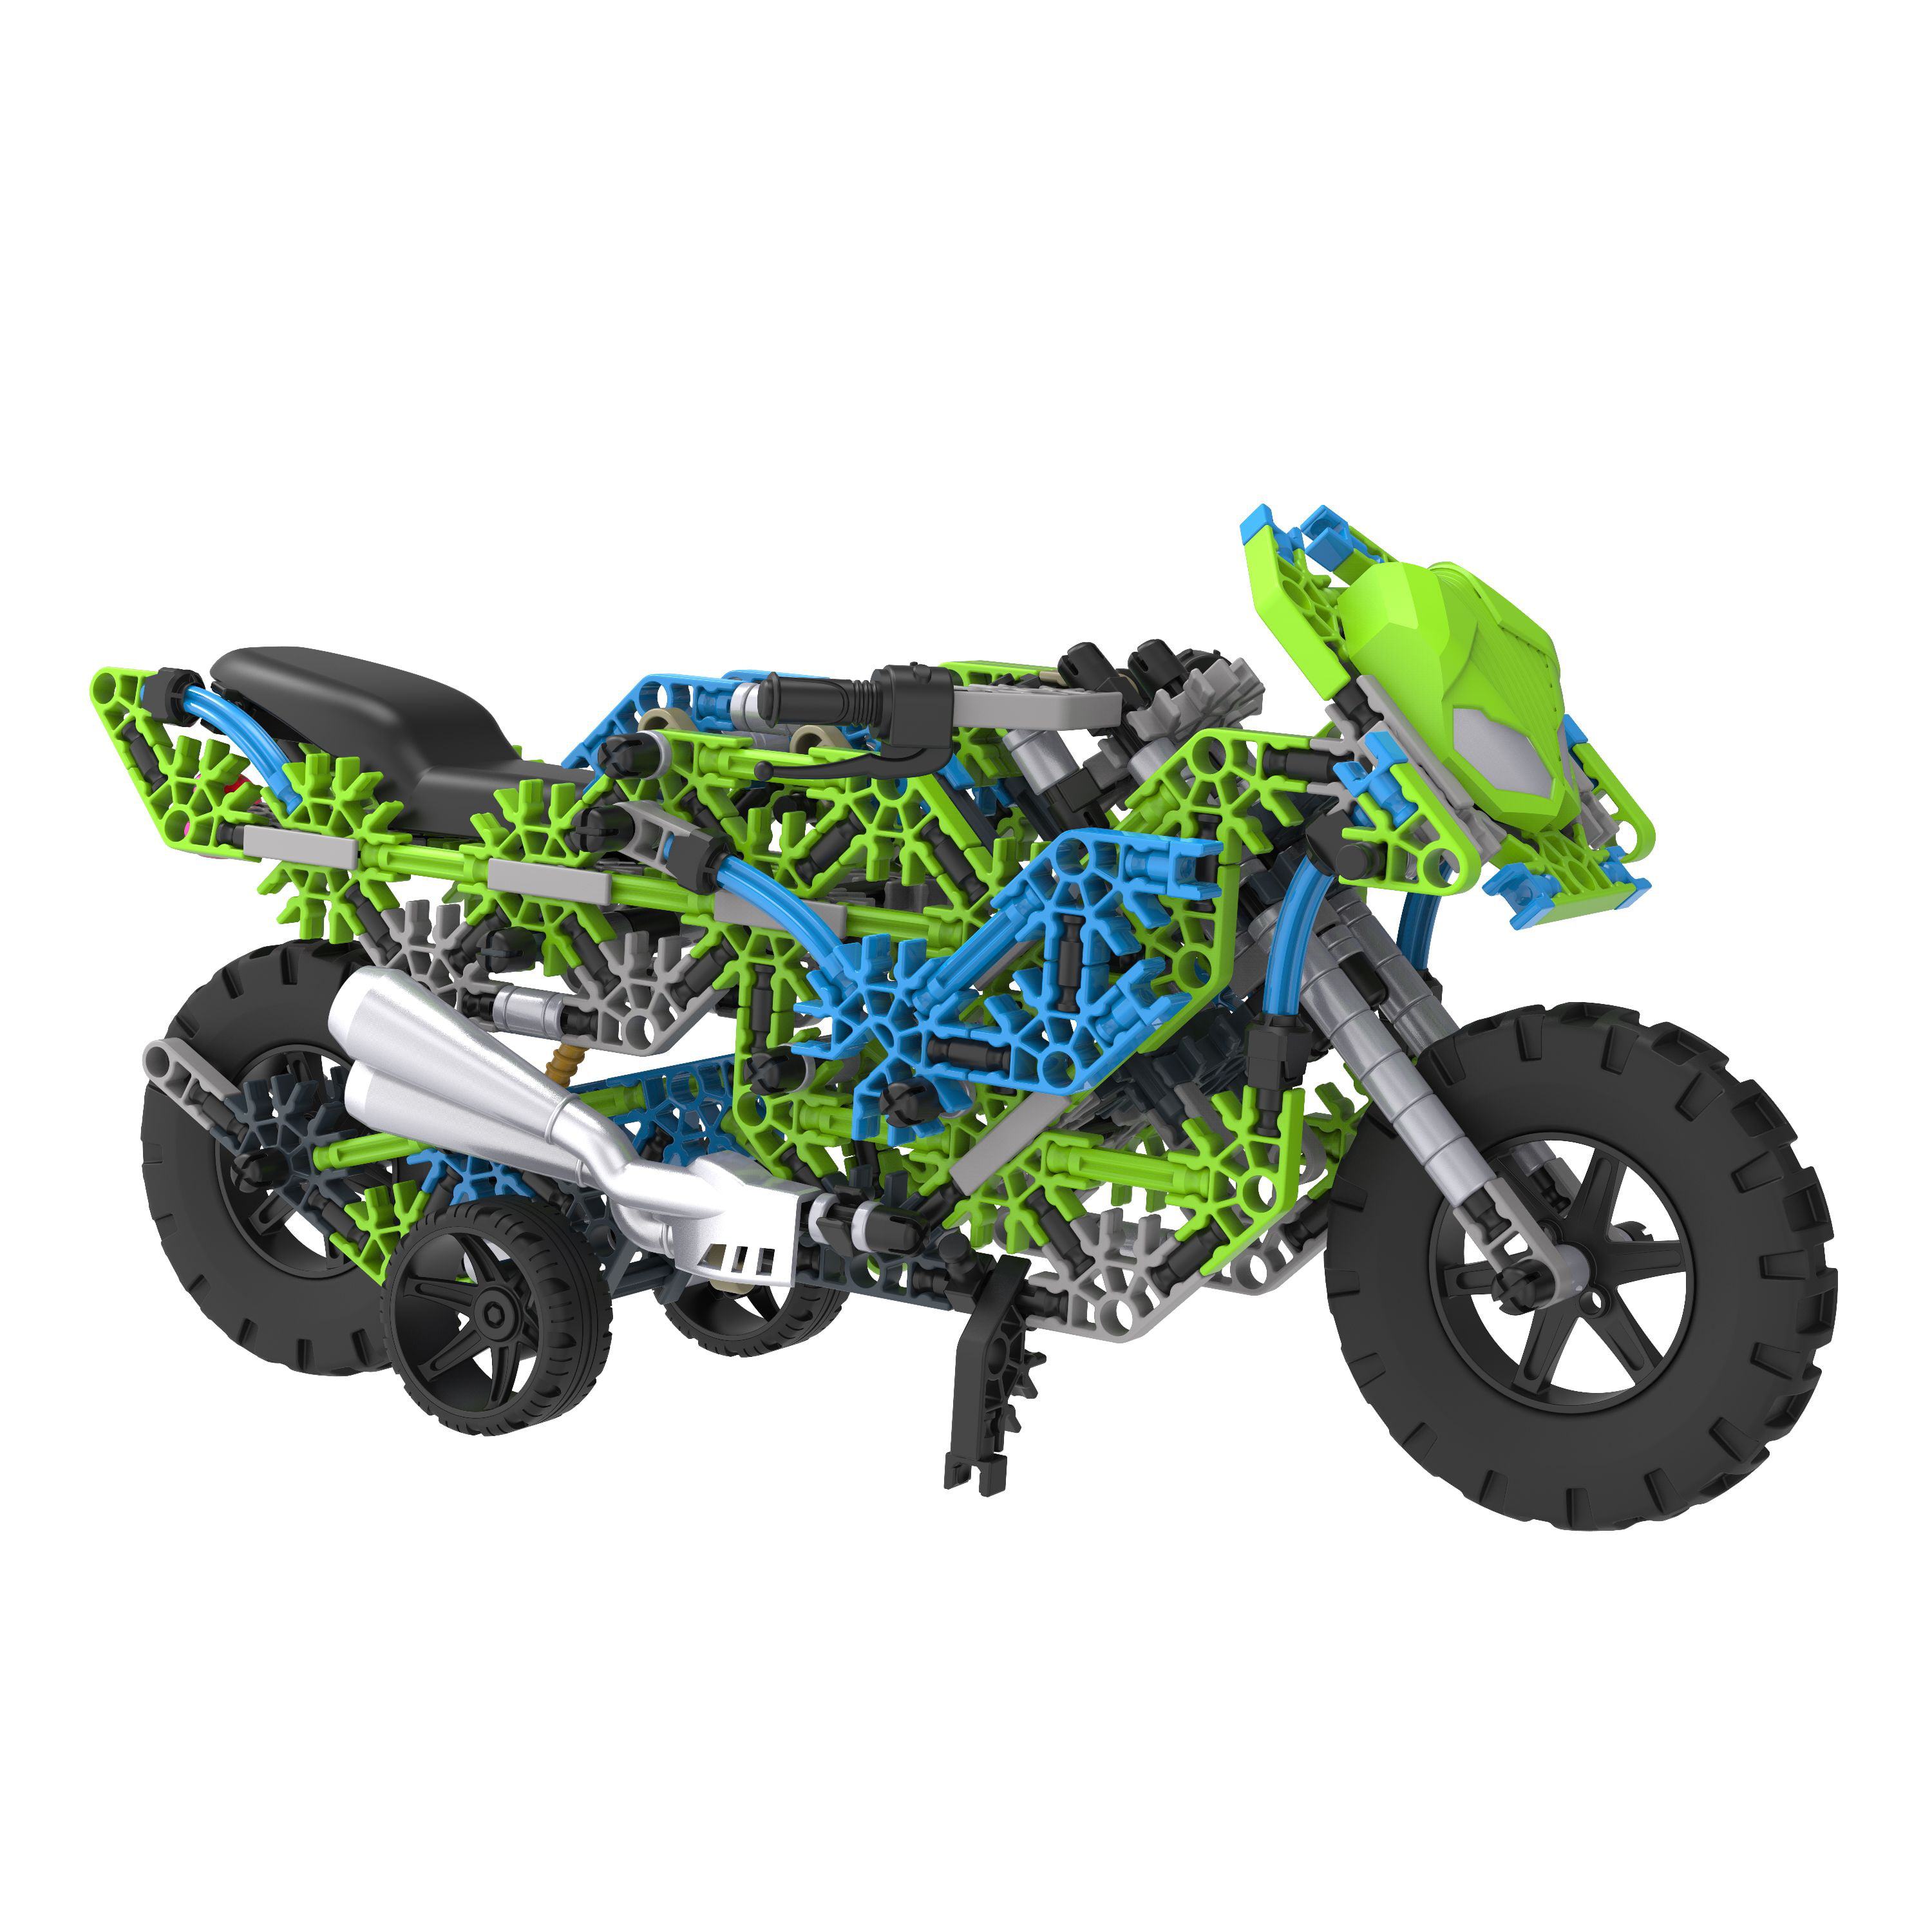 KNEX Slam Bike Extreme RARE 2001 Never Toy 10513 for sale online 